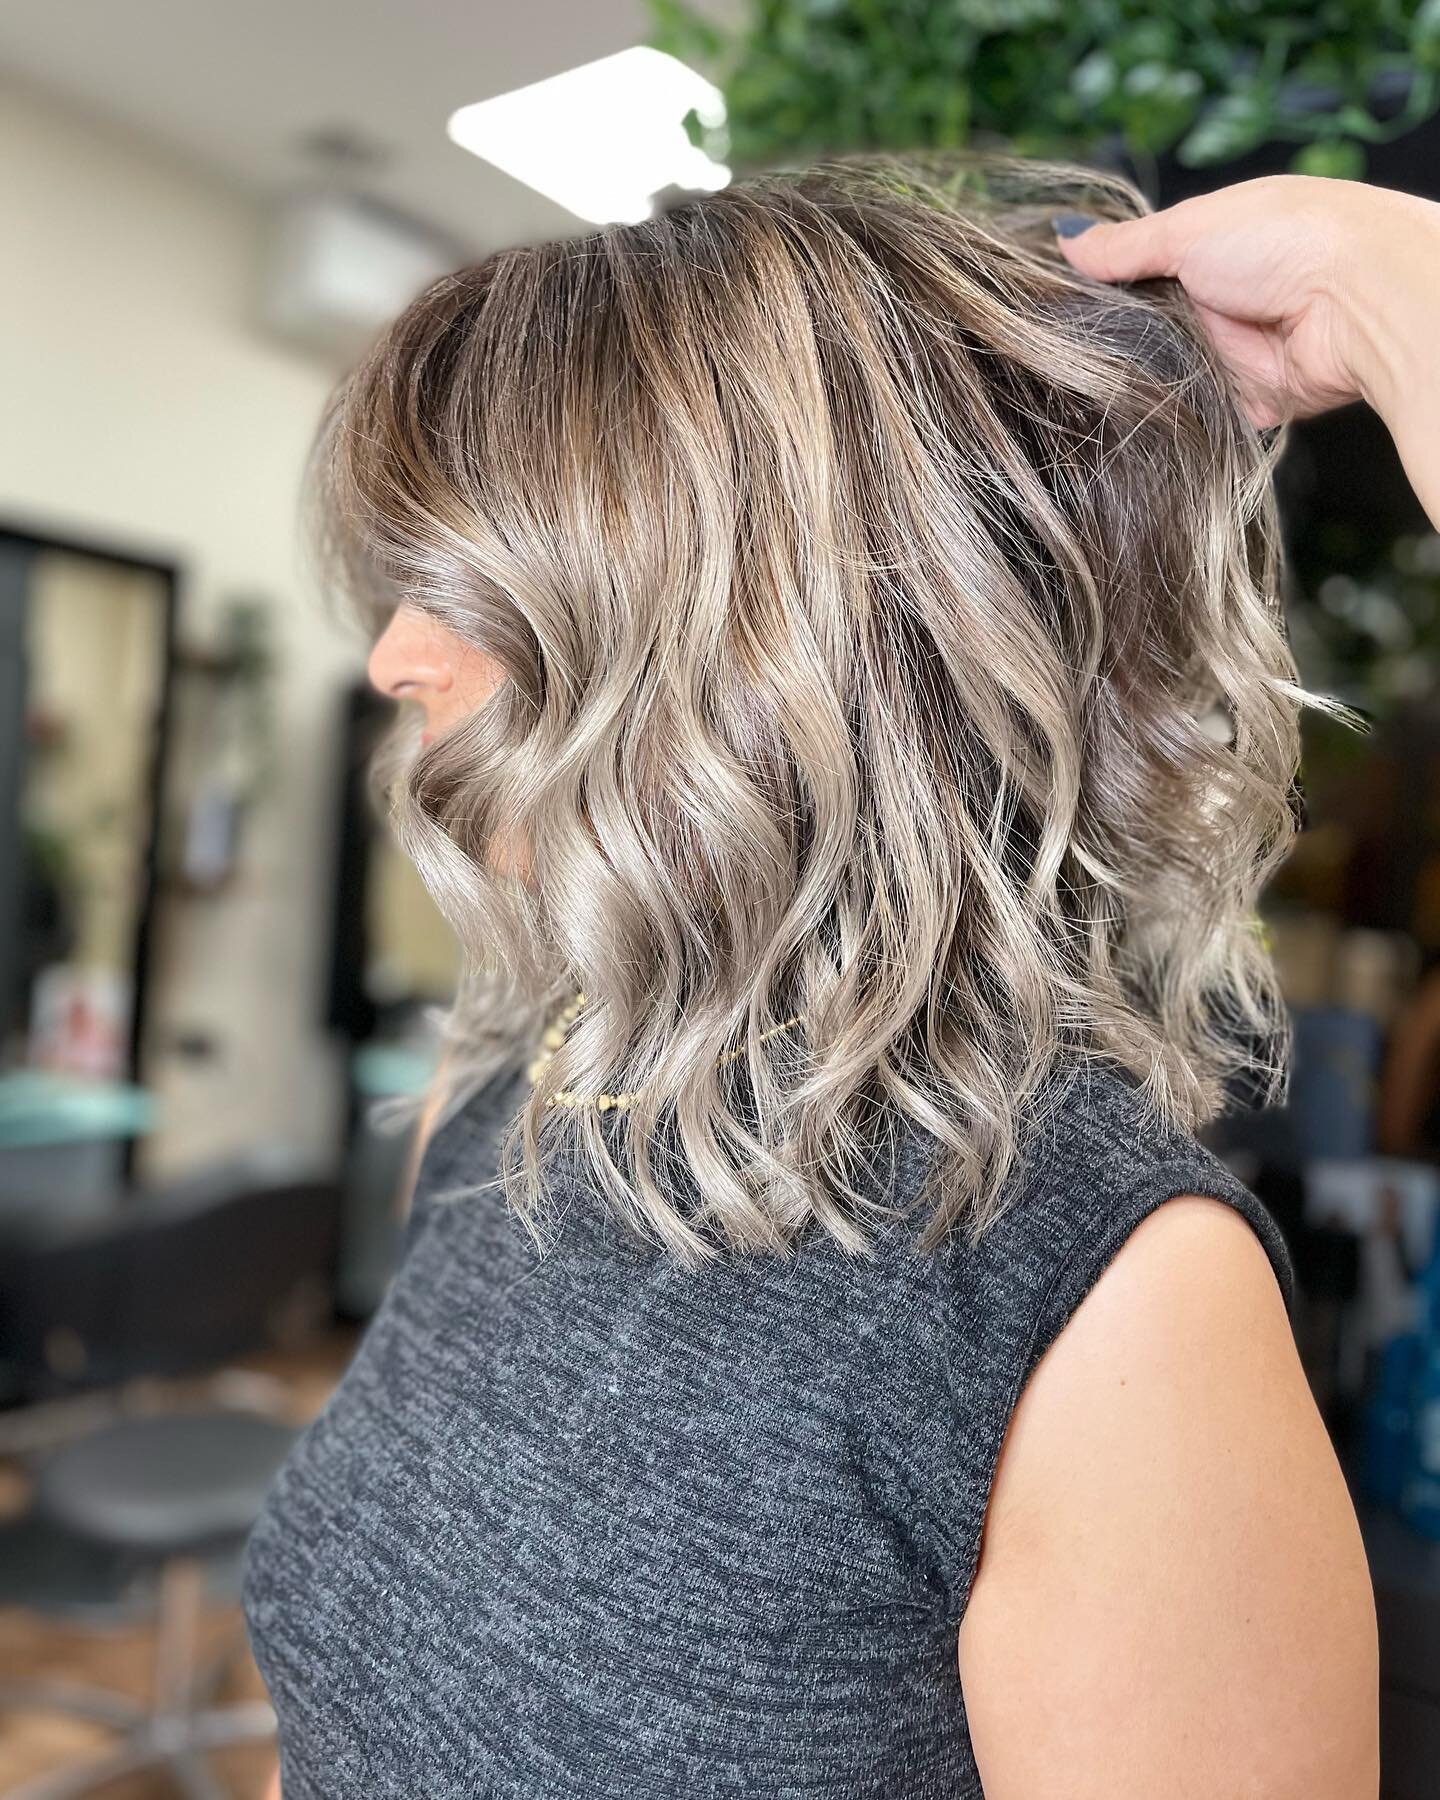 Love how colours can be corrected with love and care! Enjoy your new hair beautiful @surena_maysa 😉⭐️👌🏽🪄
.
.
@bestofbalayage 

#haircolor #hair #haircut #hairstyle #hairstyles #hairstylist #balayage #hairdresser #hairgoals #beauty #blondehair #bl